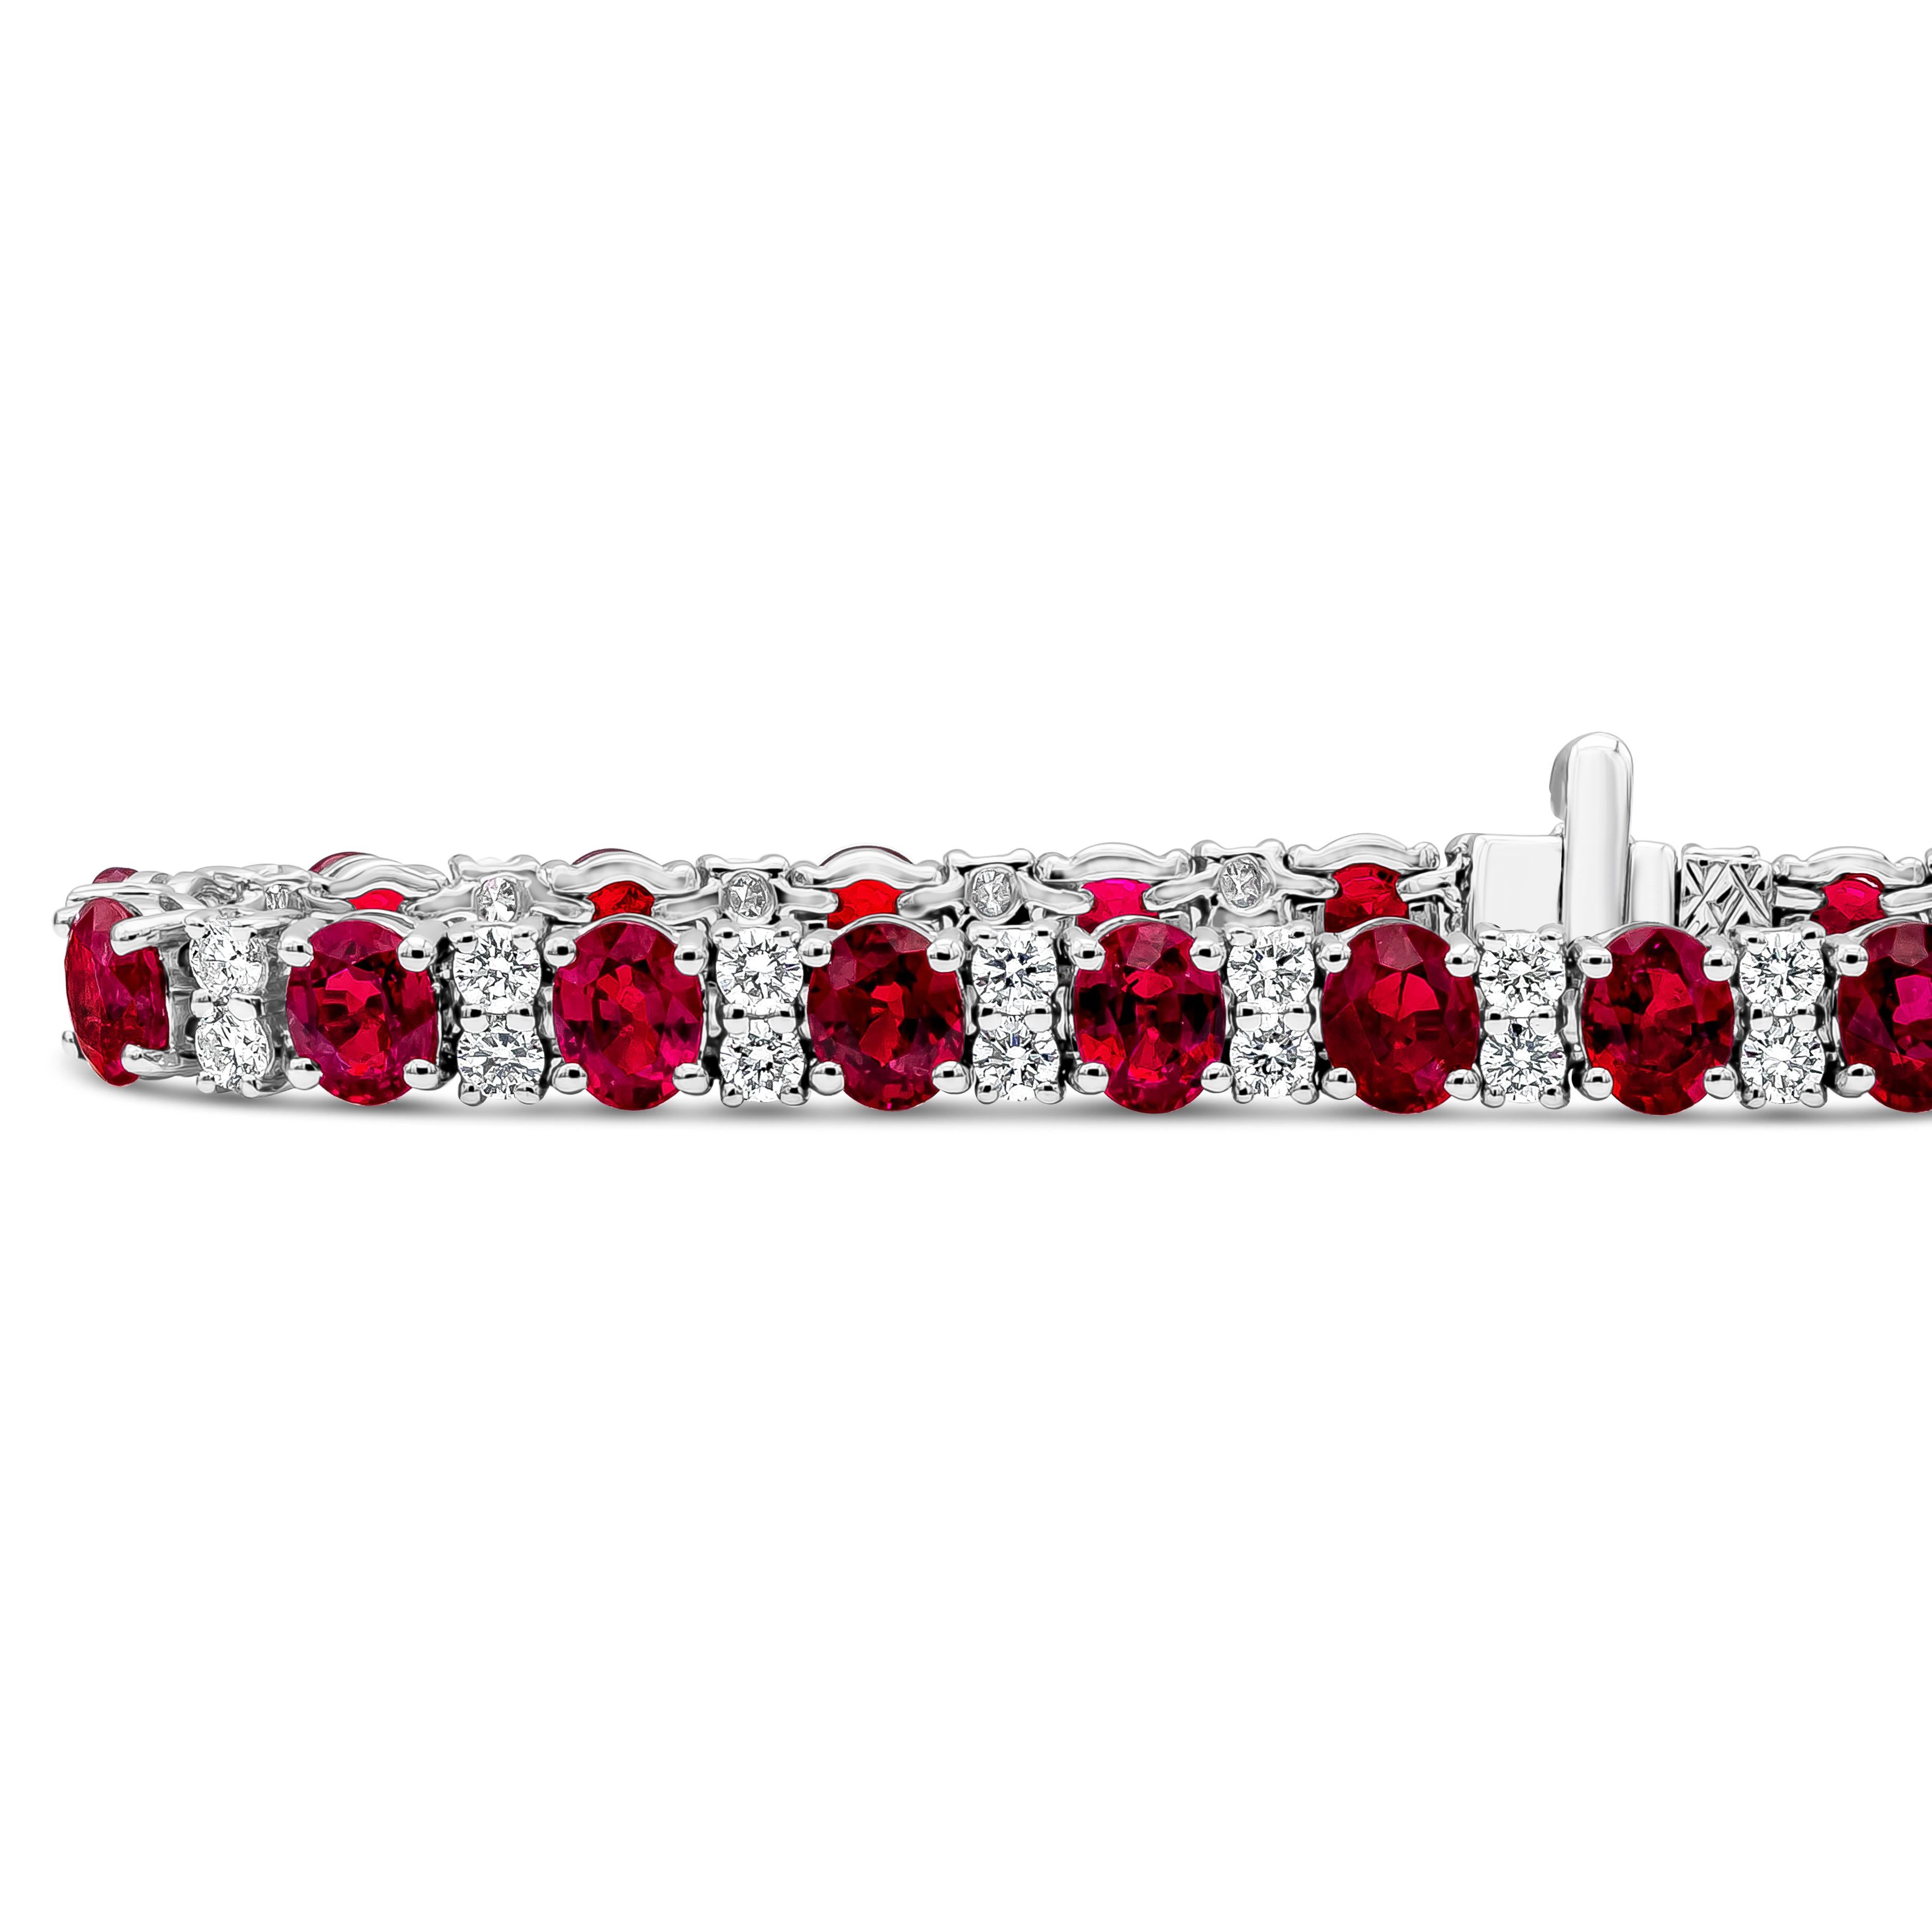 This tennis bracelet features a row of alternating oval cut ruby and round brilliant cut diamonds. Oval Cut Ruby weighs 12.65 carats and diamonds weigh 2.35 carat in F color and VS clarity. Made with 18K White Gold. 7 inches in Length. 

Roman